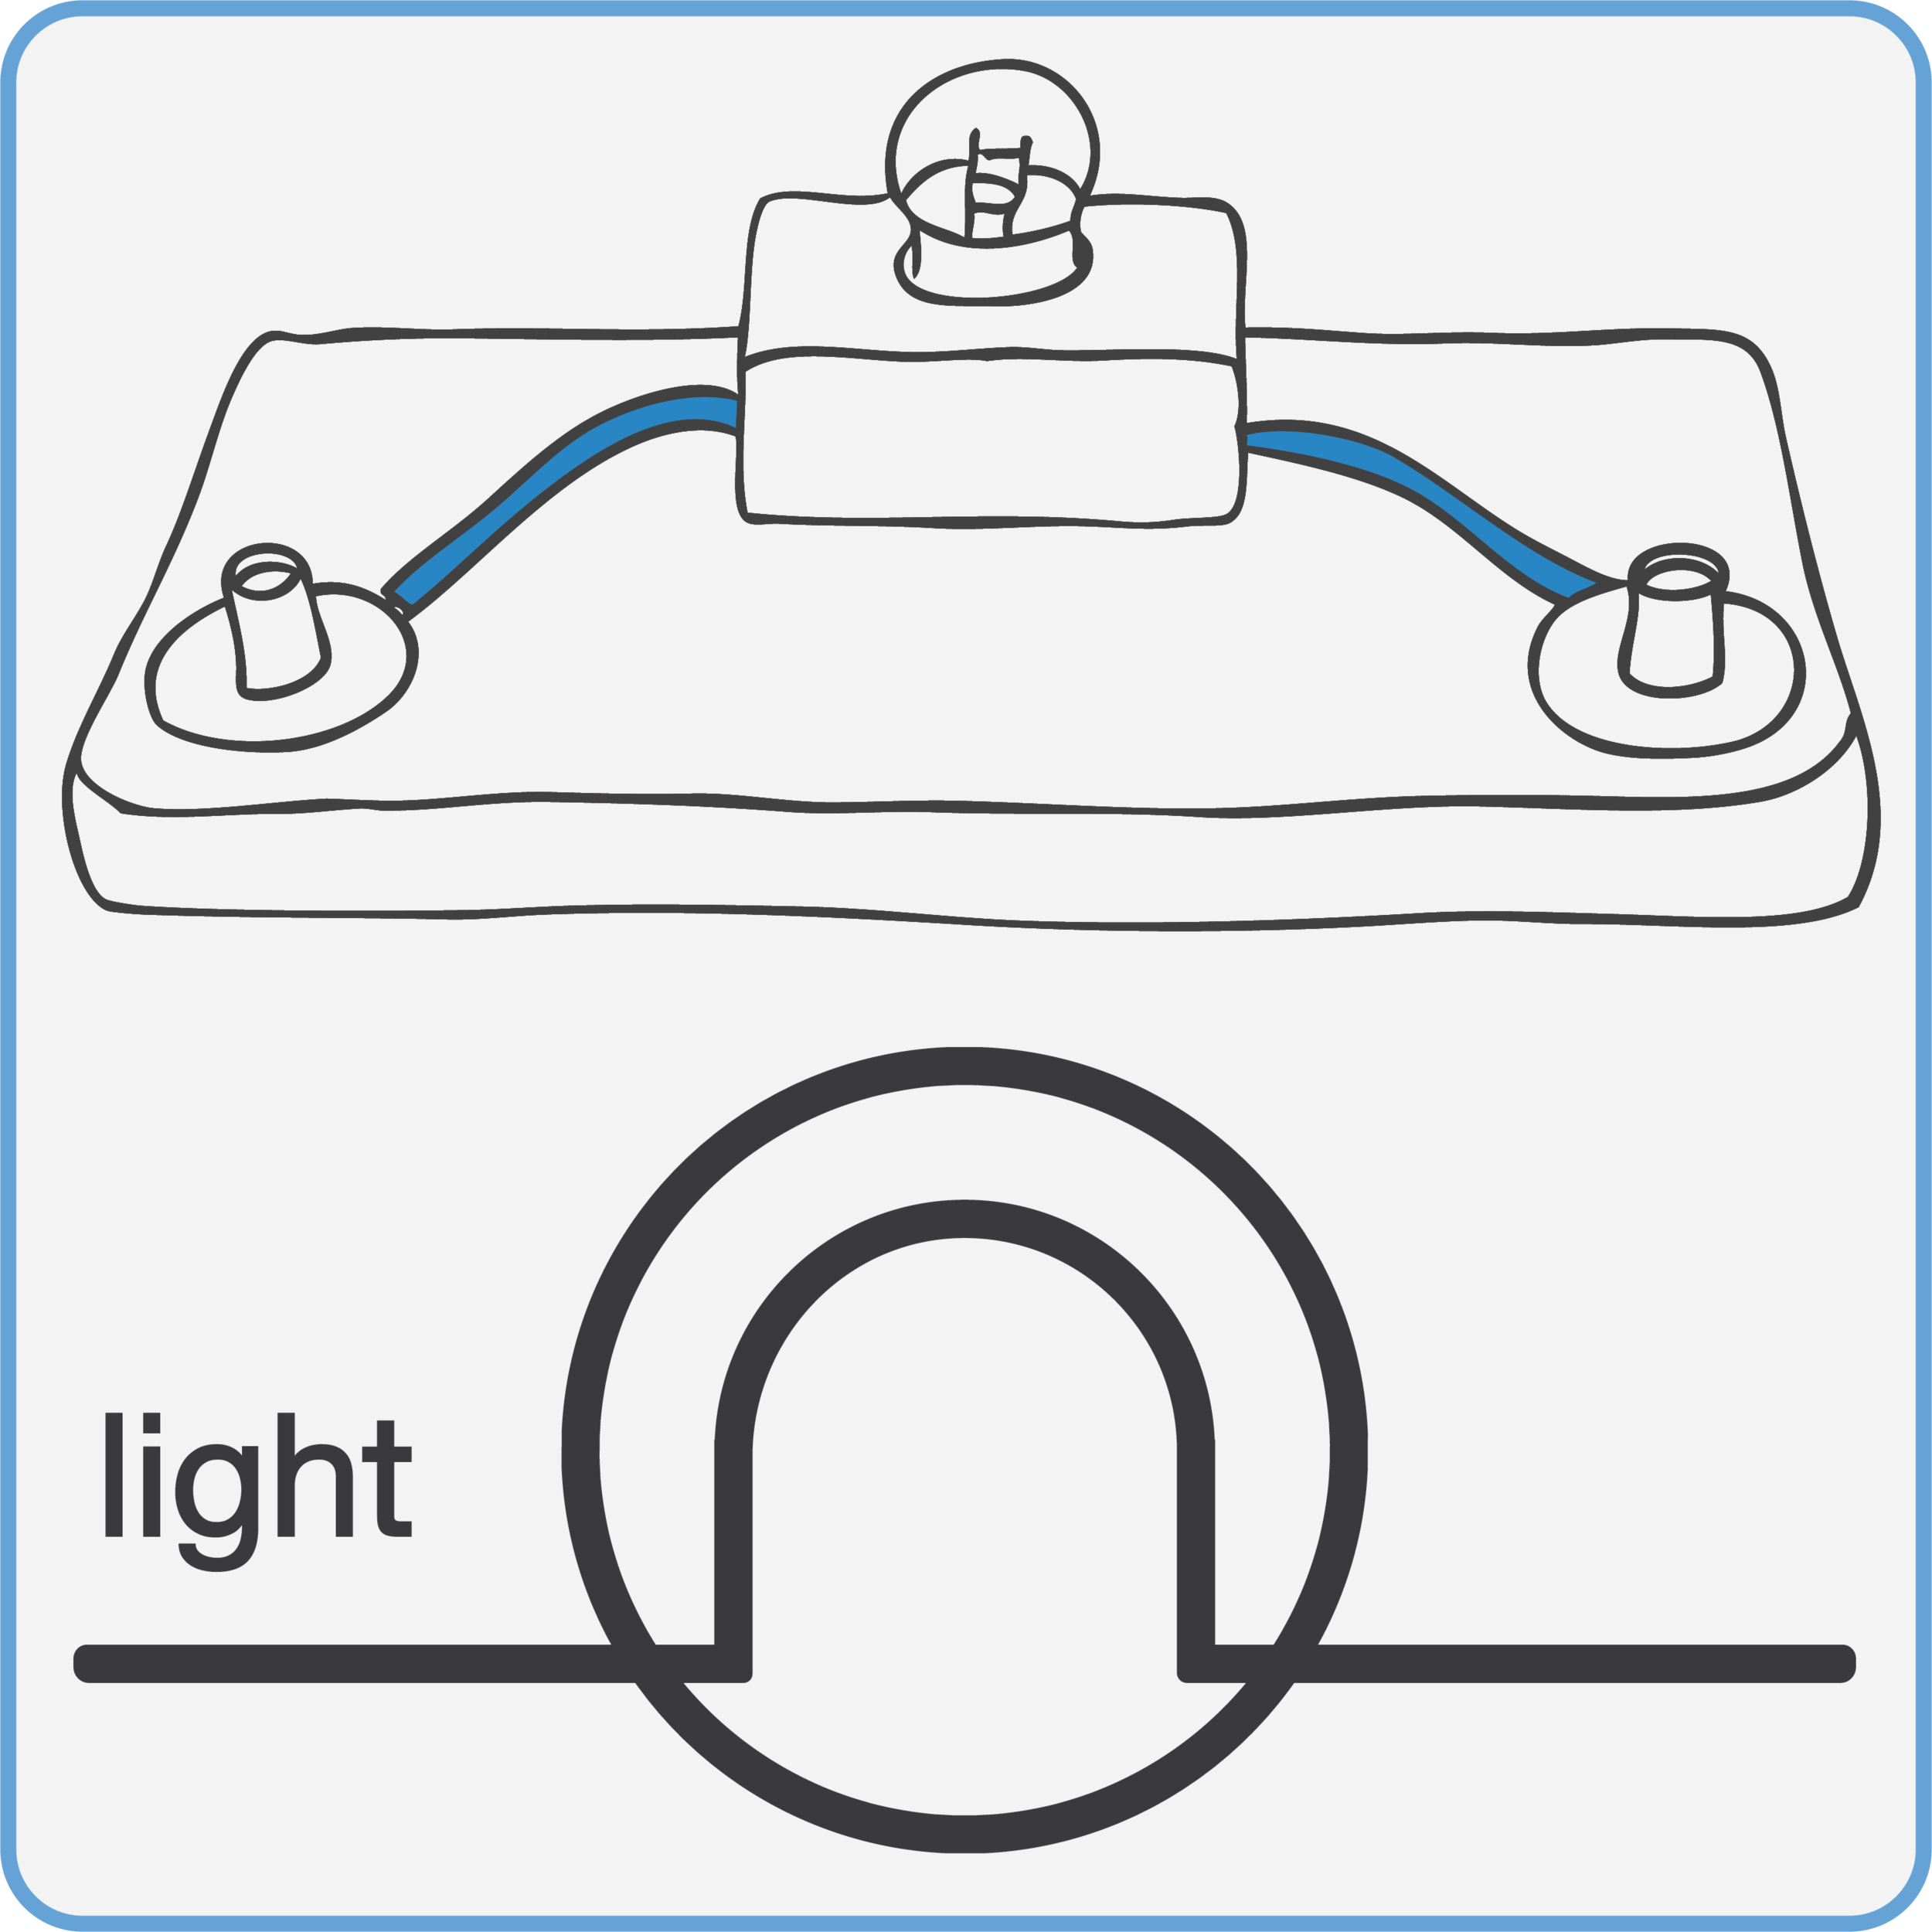 light-schematic.png